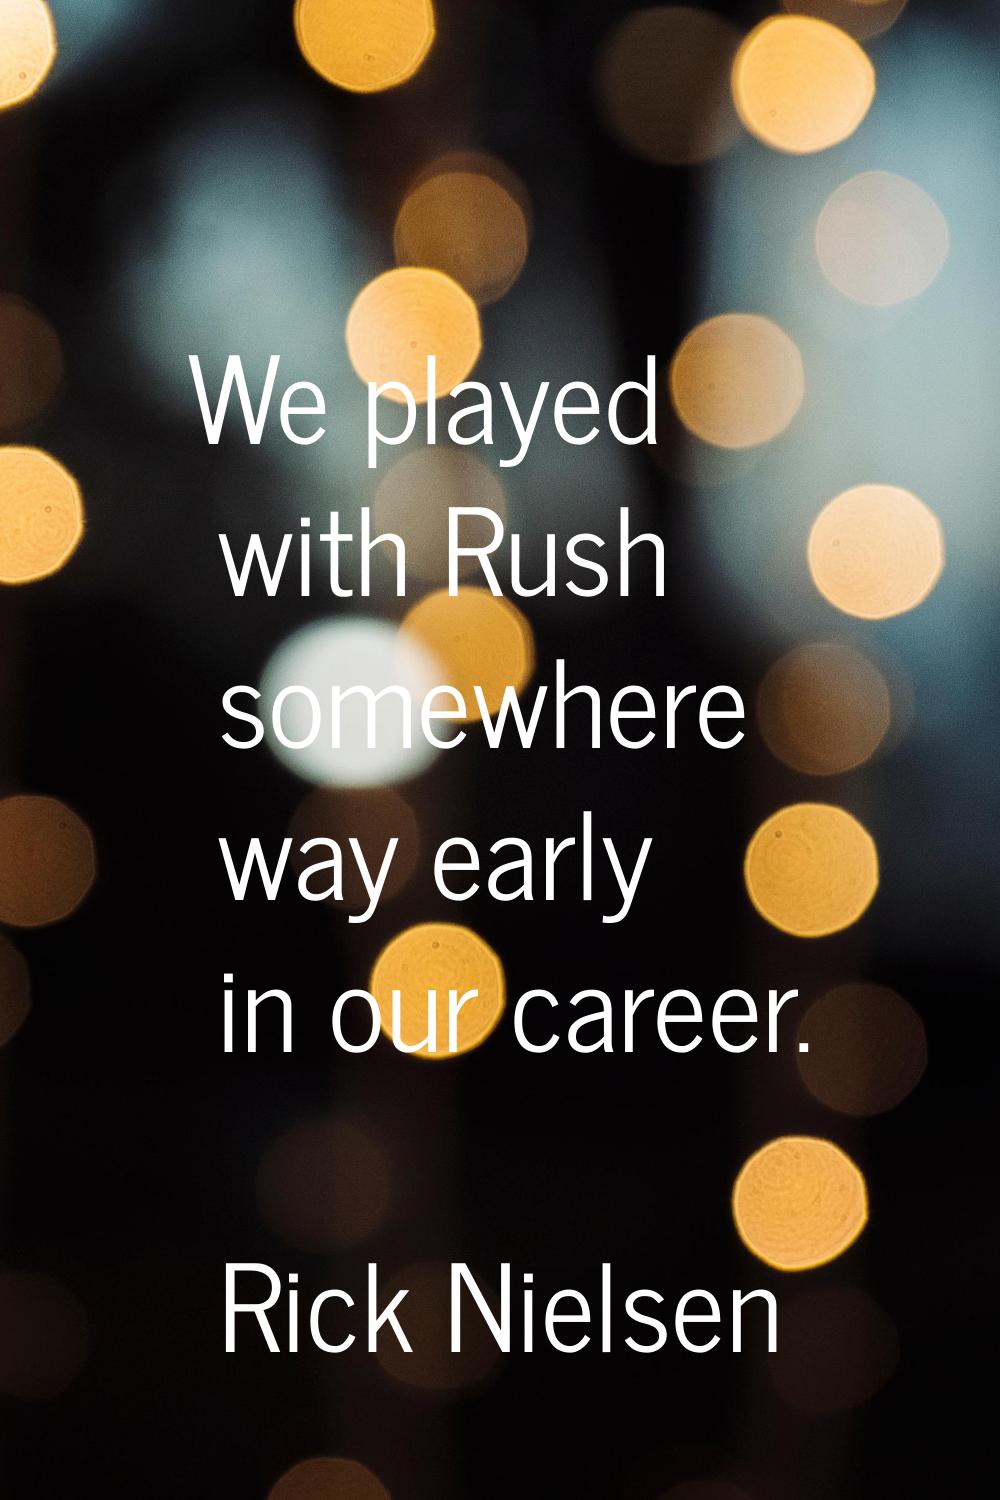 We played with Rush somewhere way early in our career.